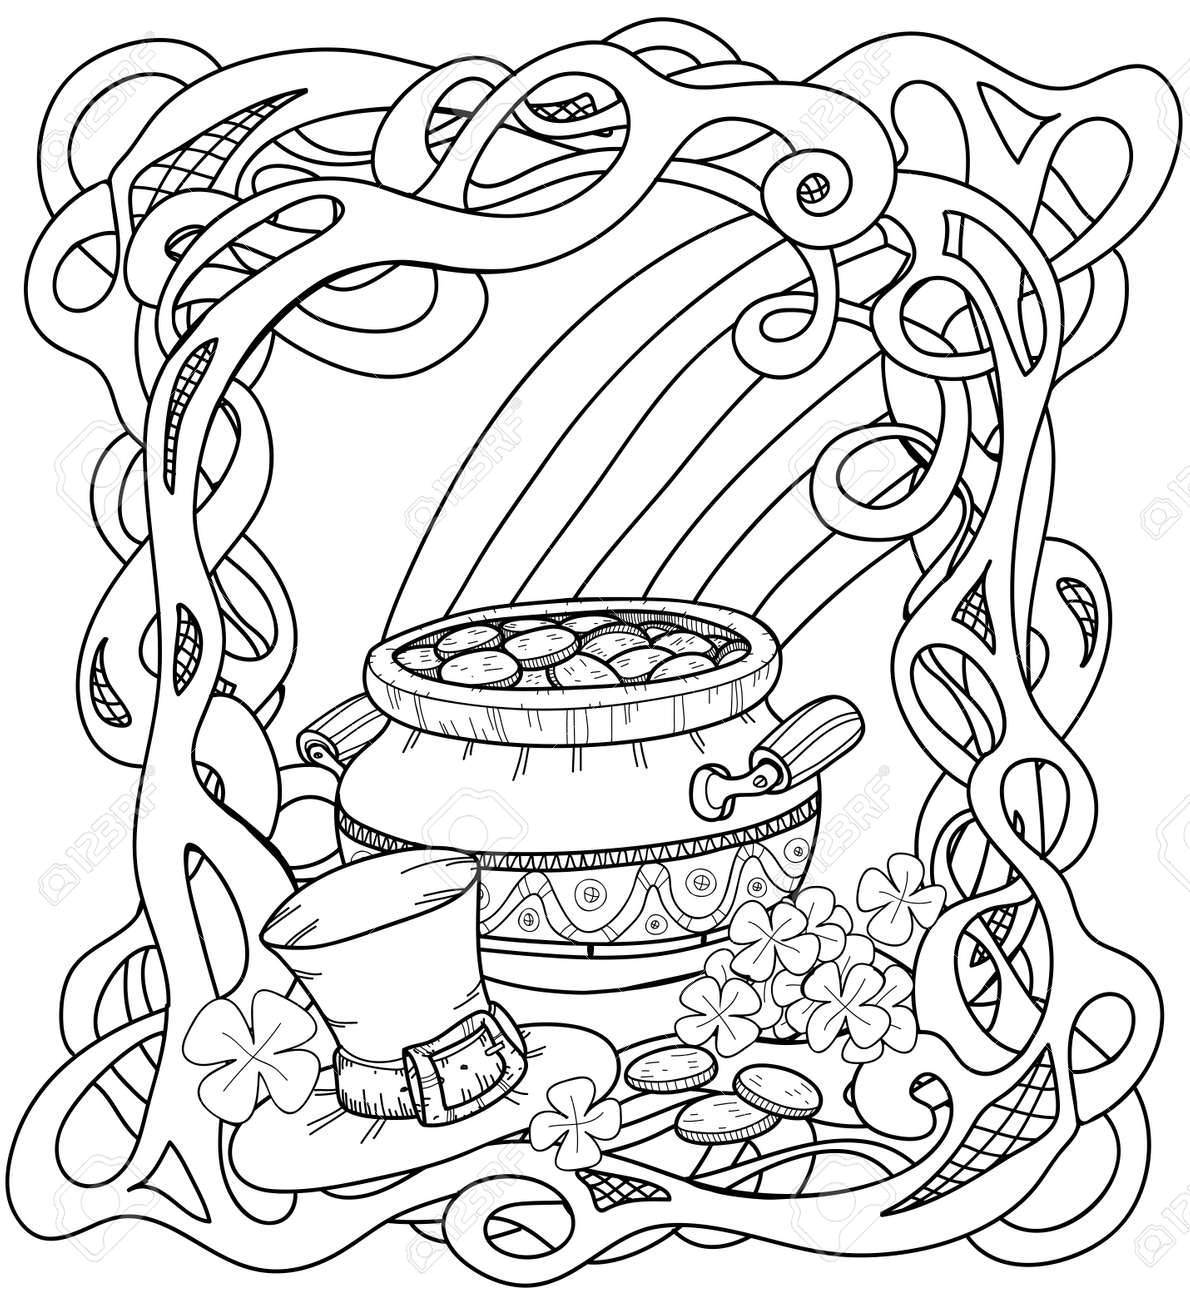 Leprechauns gold coloring page with pot of gold rainbow leprechaun hat and clovers royalty free svg cliparts vectors and stock illustration image